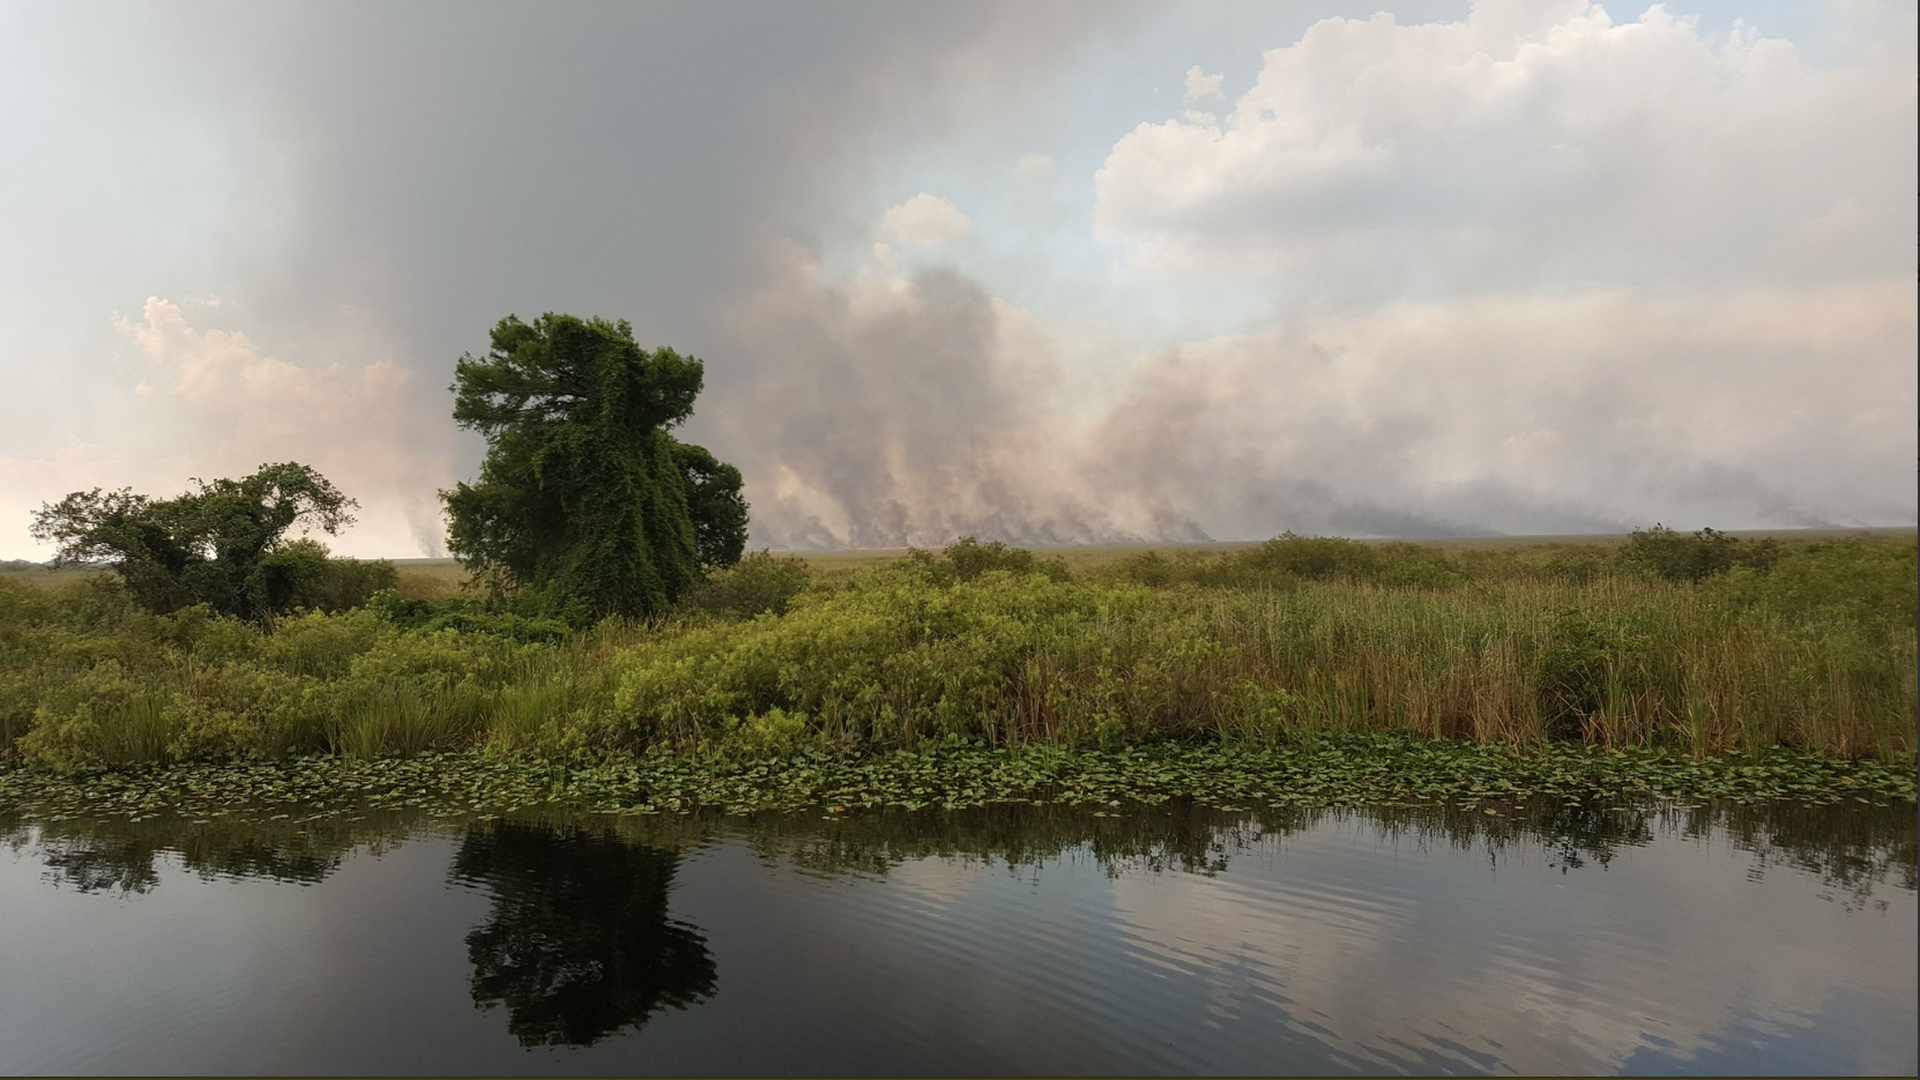 A  Florida Forest Service picture of the Everglades fire.